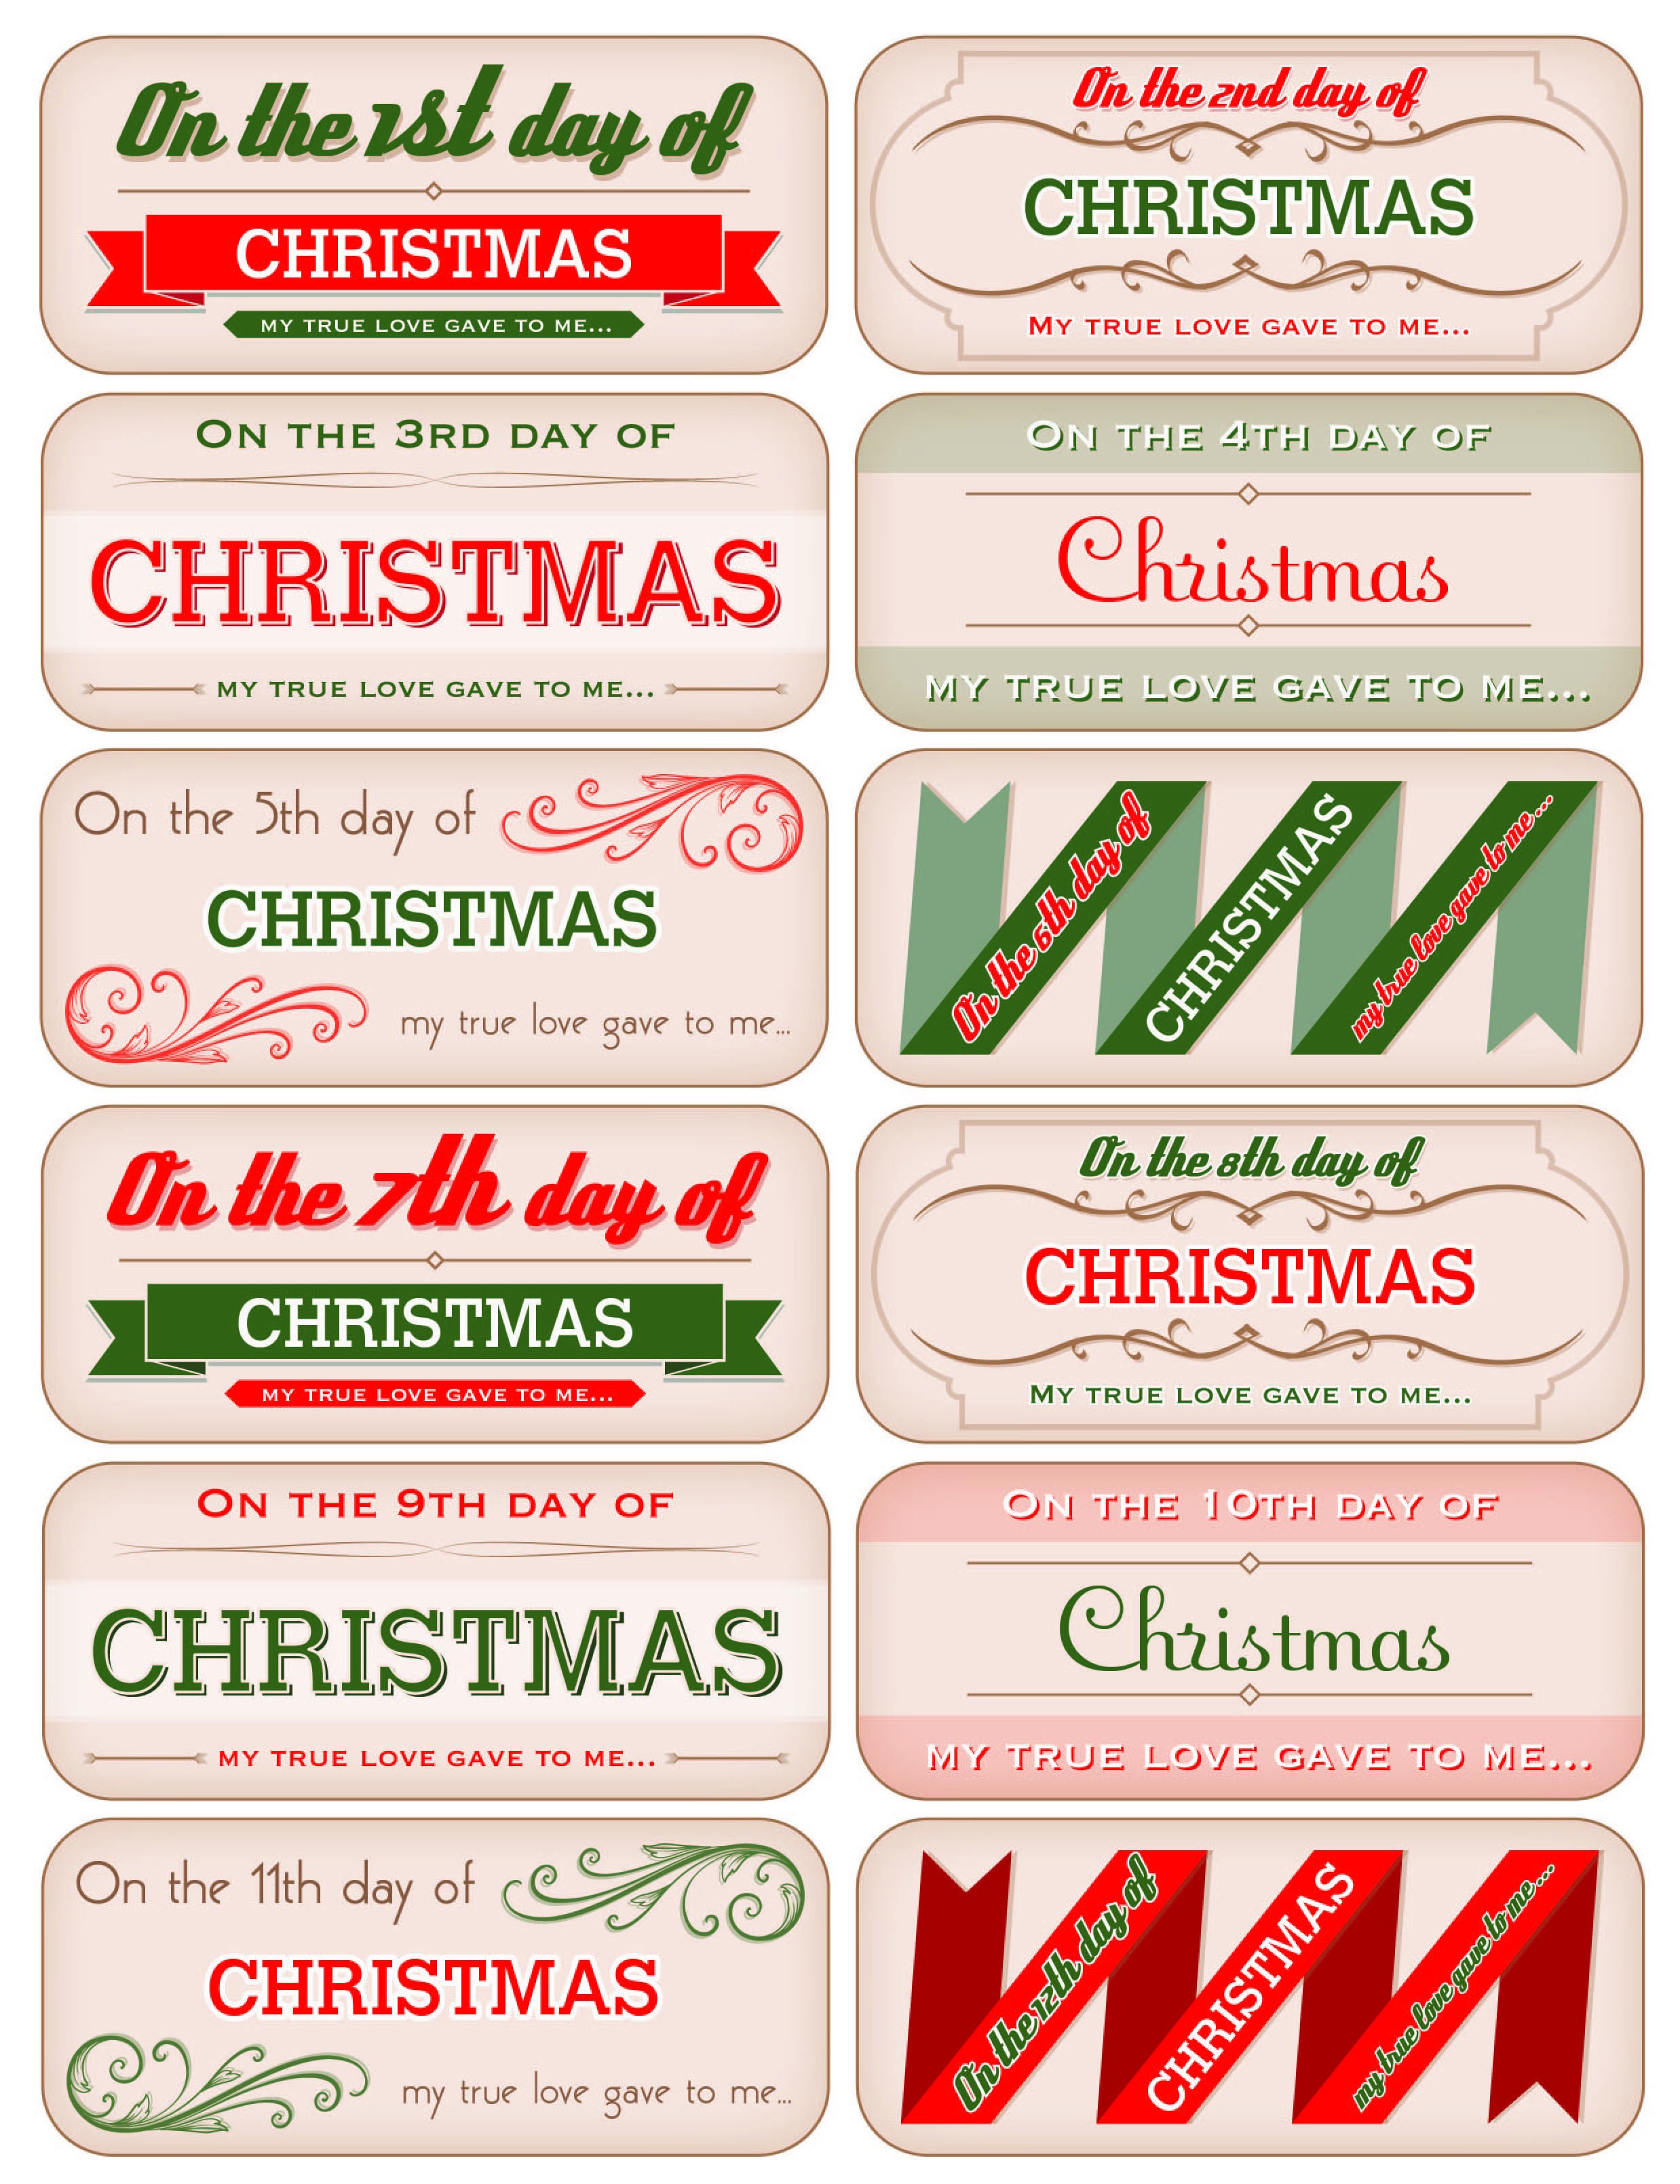 12 Days Of Christmas Tags - Free Download! | Decking The Halls With - Free Printable 12 Days Of Christmas Gift Tags